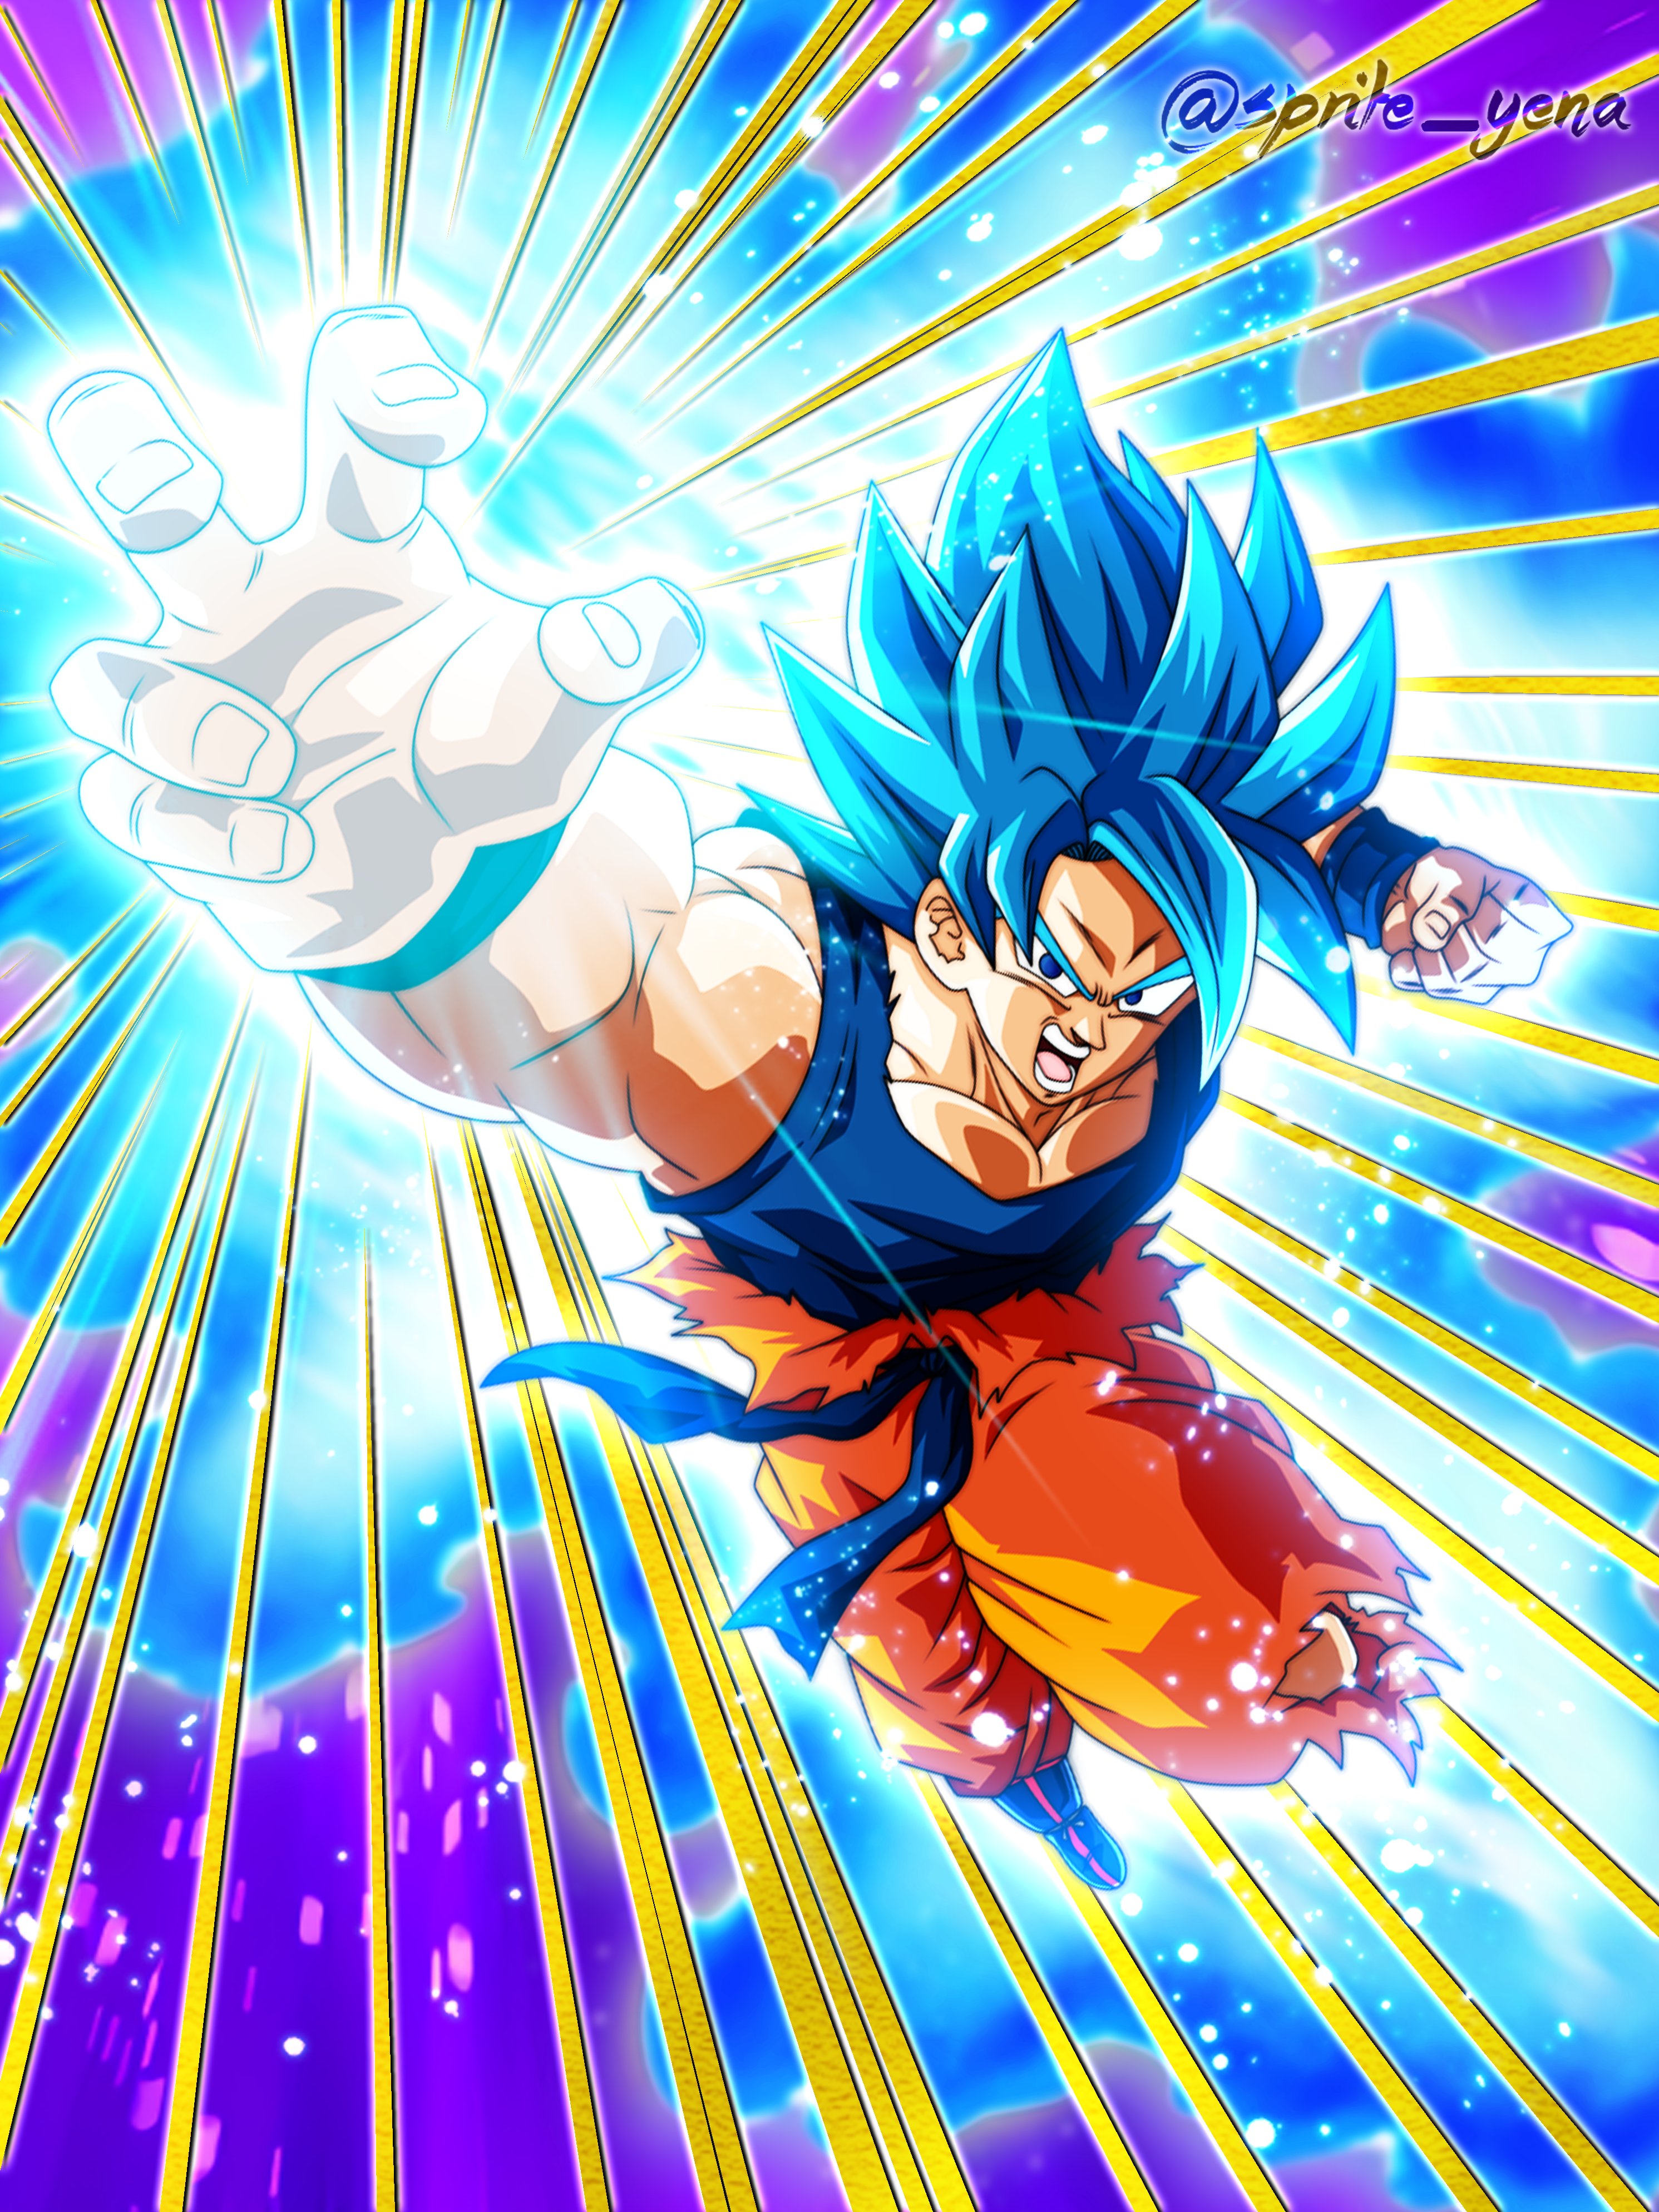 Saiyan Day] Dokkan Battle Releasing New Super Saiyan God Goku! Check Out  the Painstakingly Crafted Animations!!]